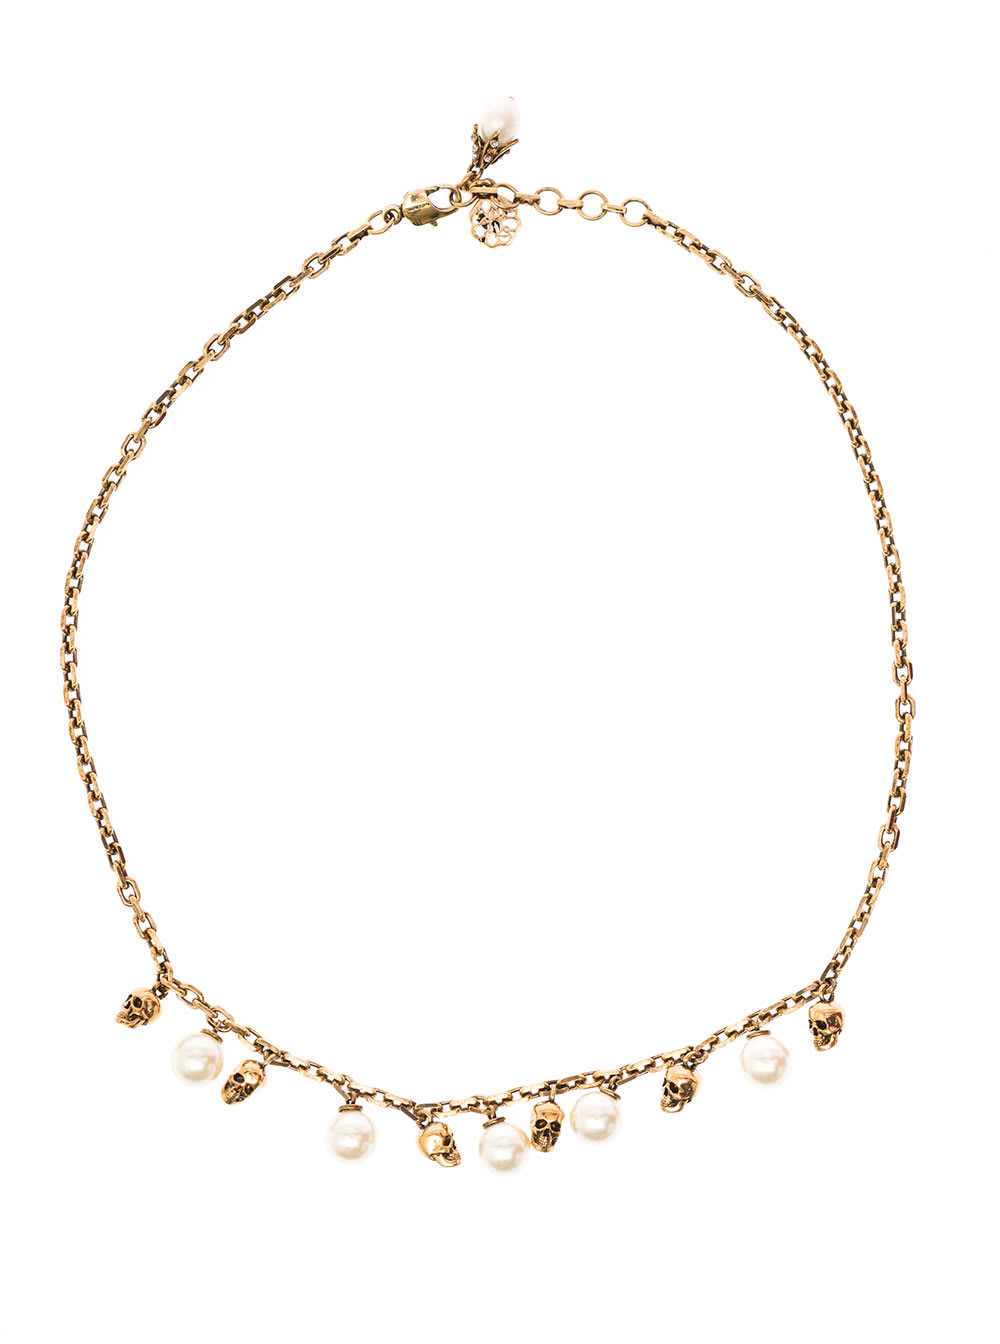 Alexander Mcqueen Womans Golden Brass Chain Necklace With Skull And Pearls